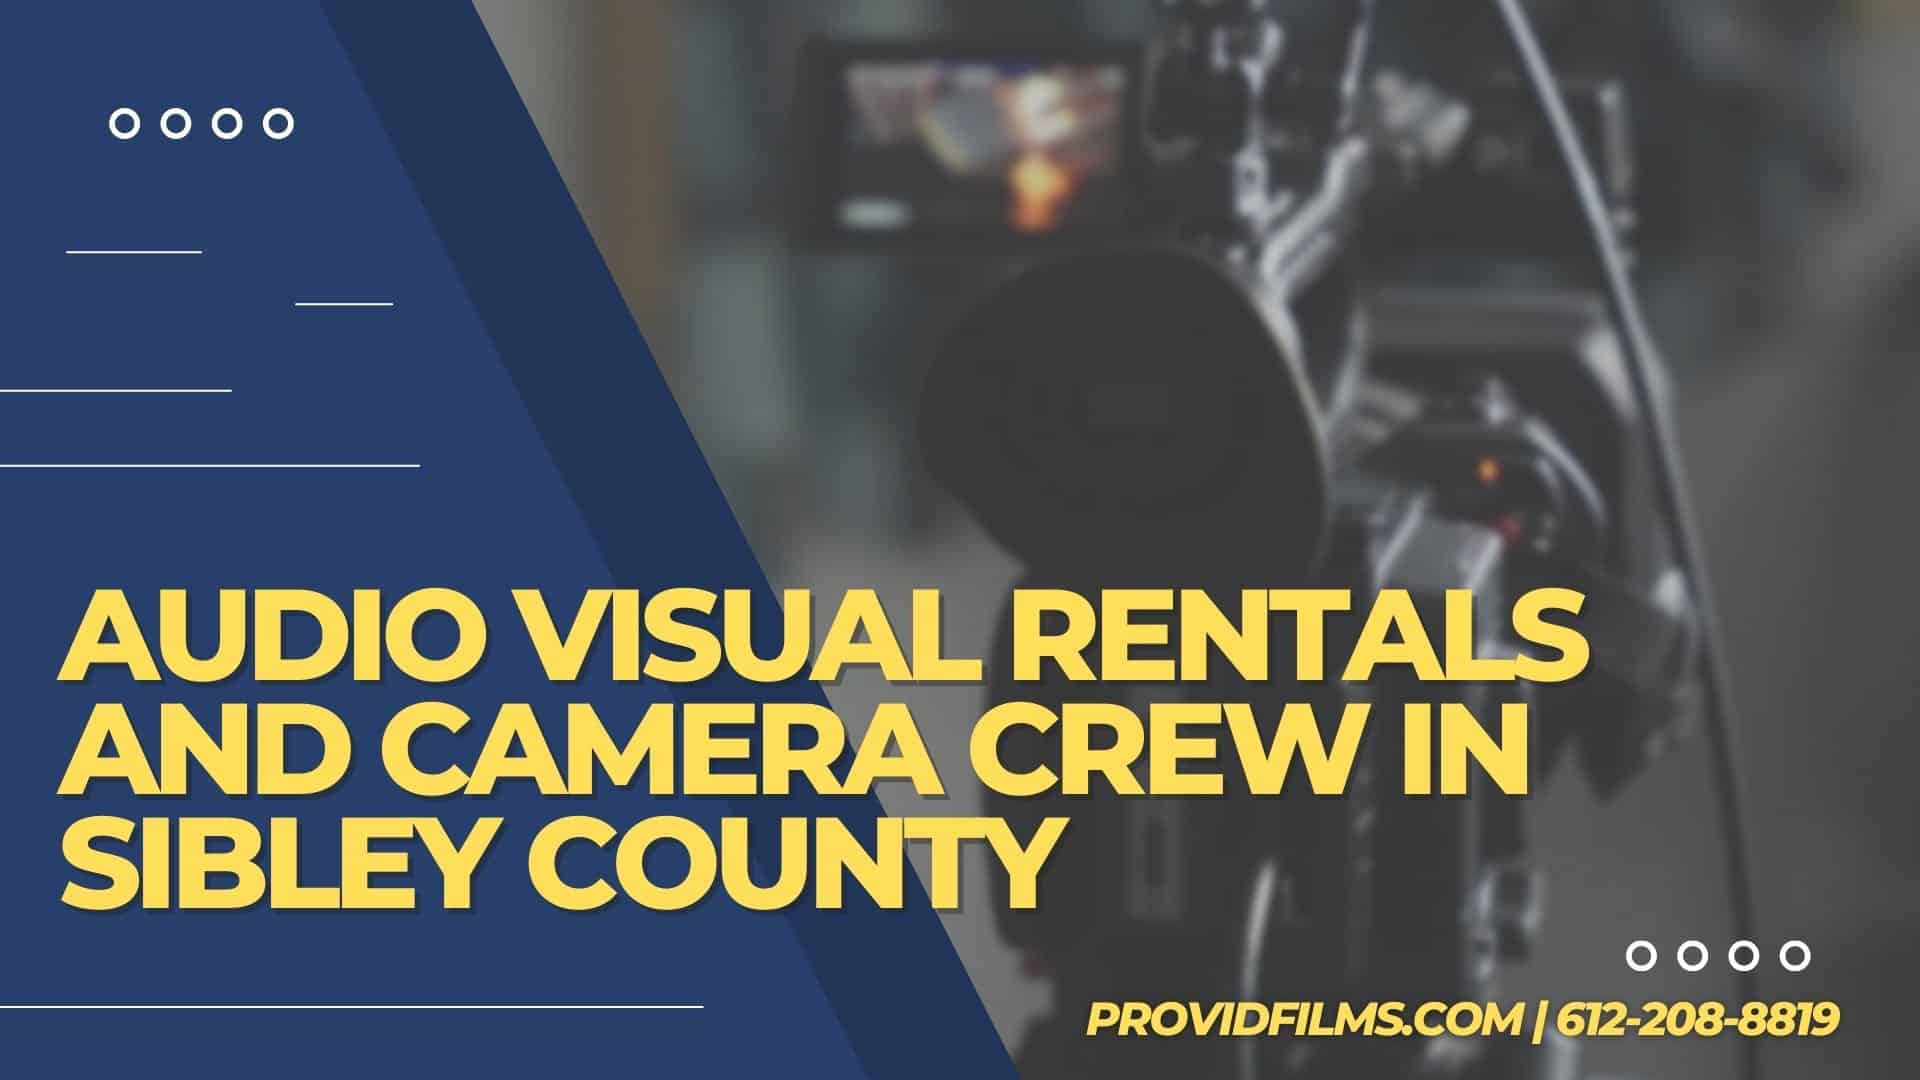 Graphic with a video camera crew with the text saying "AV Rental and Camera Crew in Sibley County"